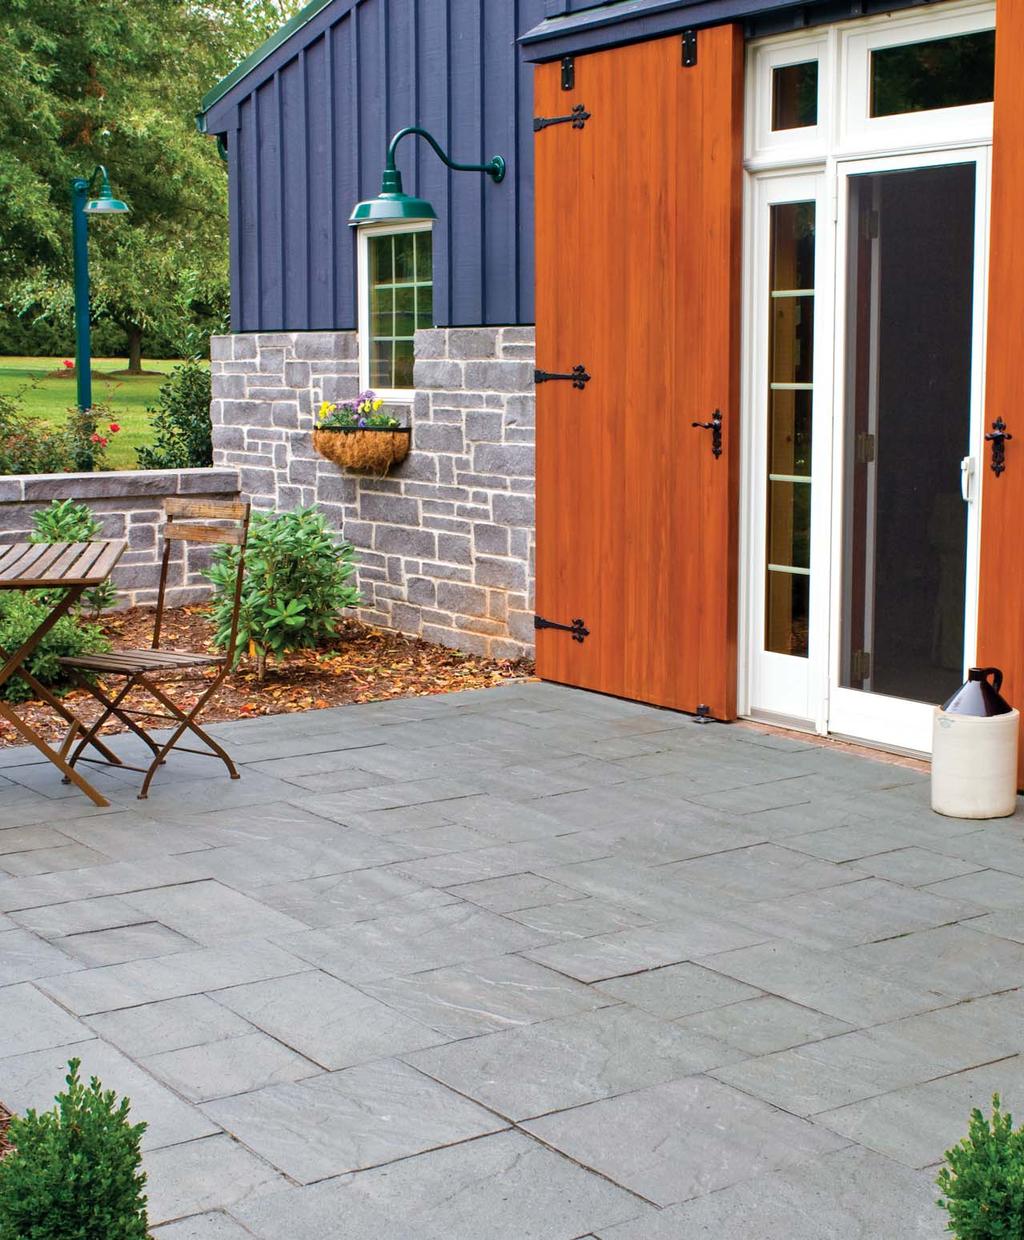 SlateFace Pavers shown in